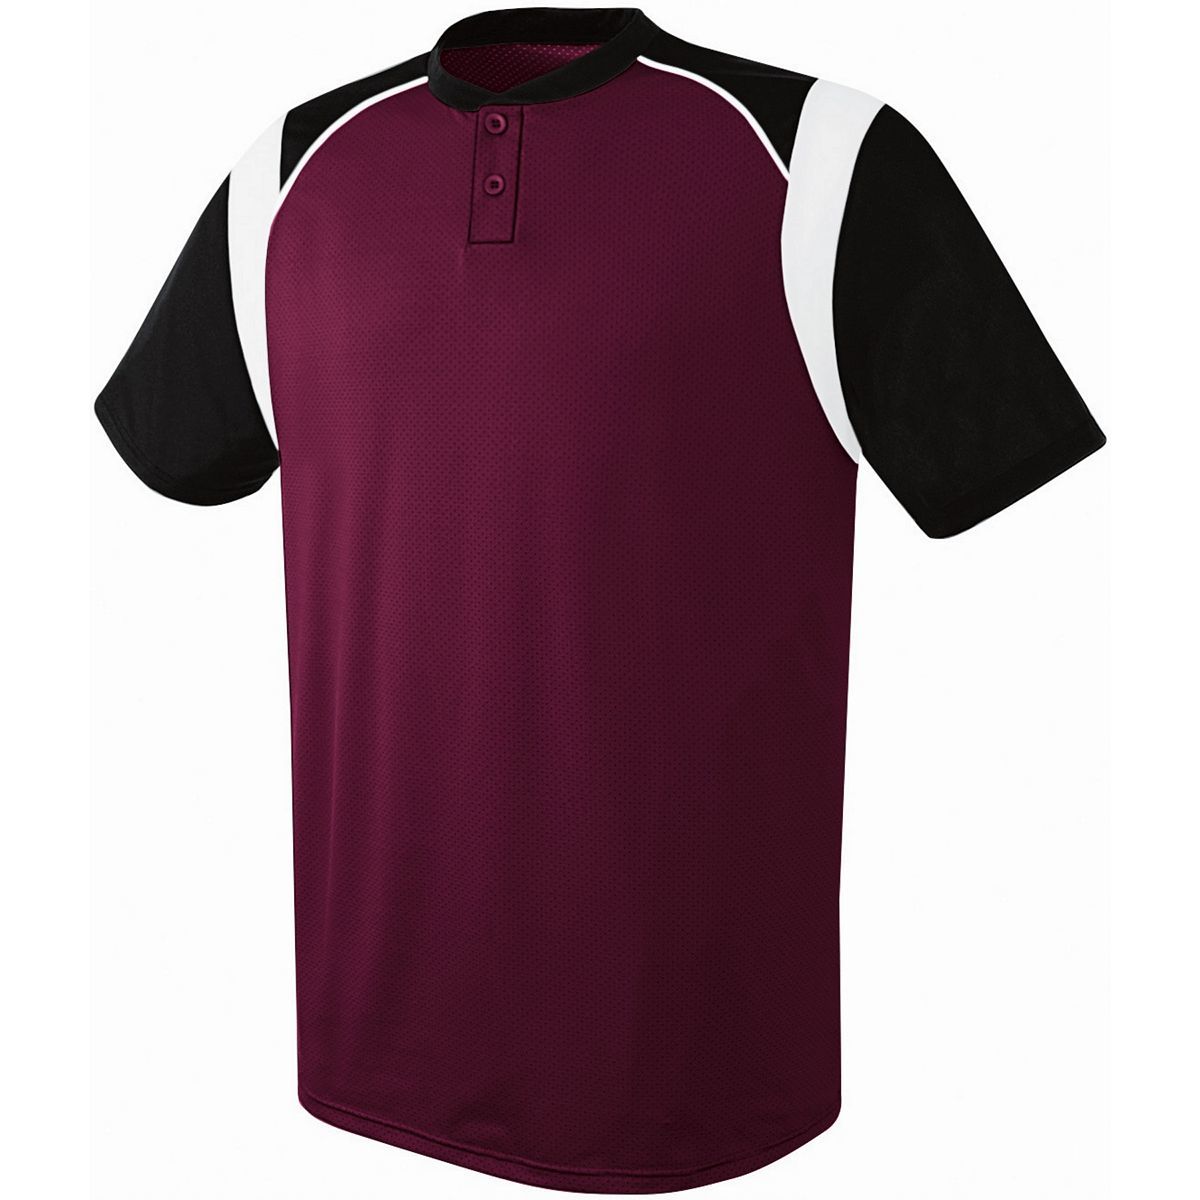 Augusta Sportswear Youth Wildcard Two-Button Jersey in Maroon/Black/White  -Part of the Youth, Youth-Jersey, Augusta-Products, Baseball, Shirts, All-Sports, All-Sports-1 product lines at KanaleyCreations.com